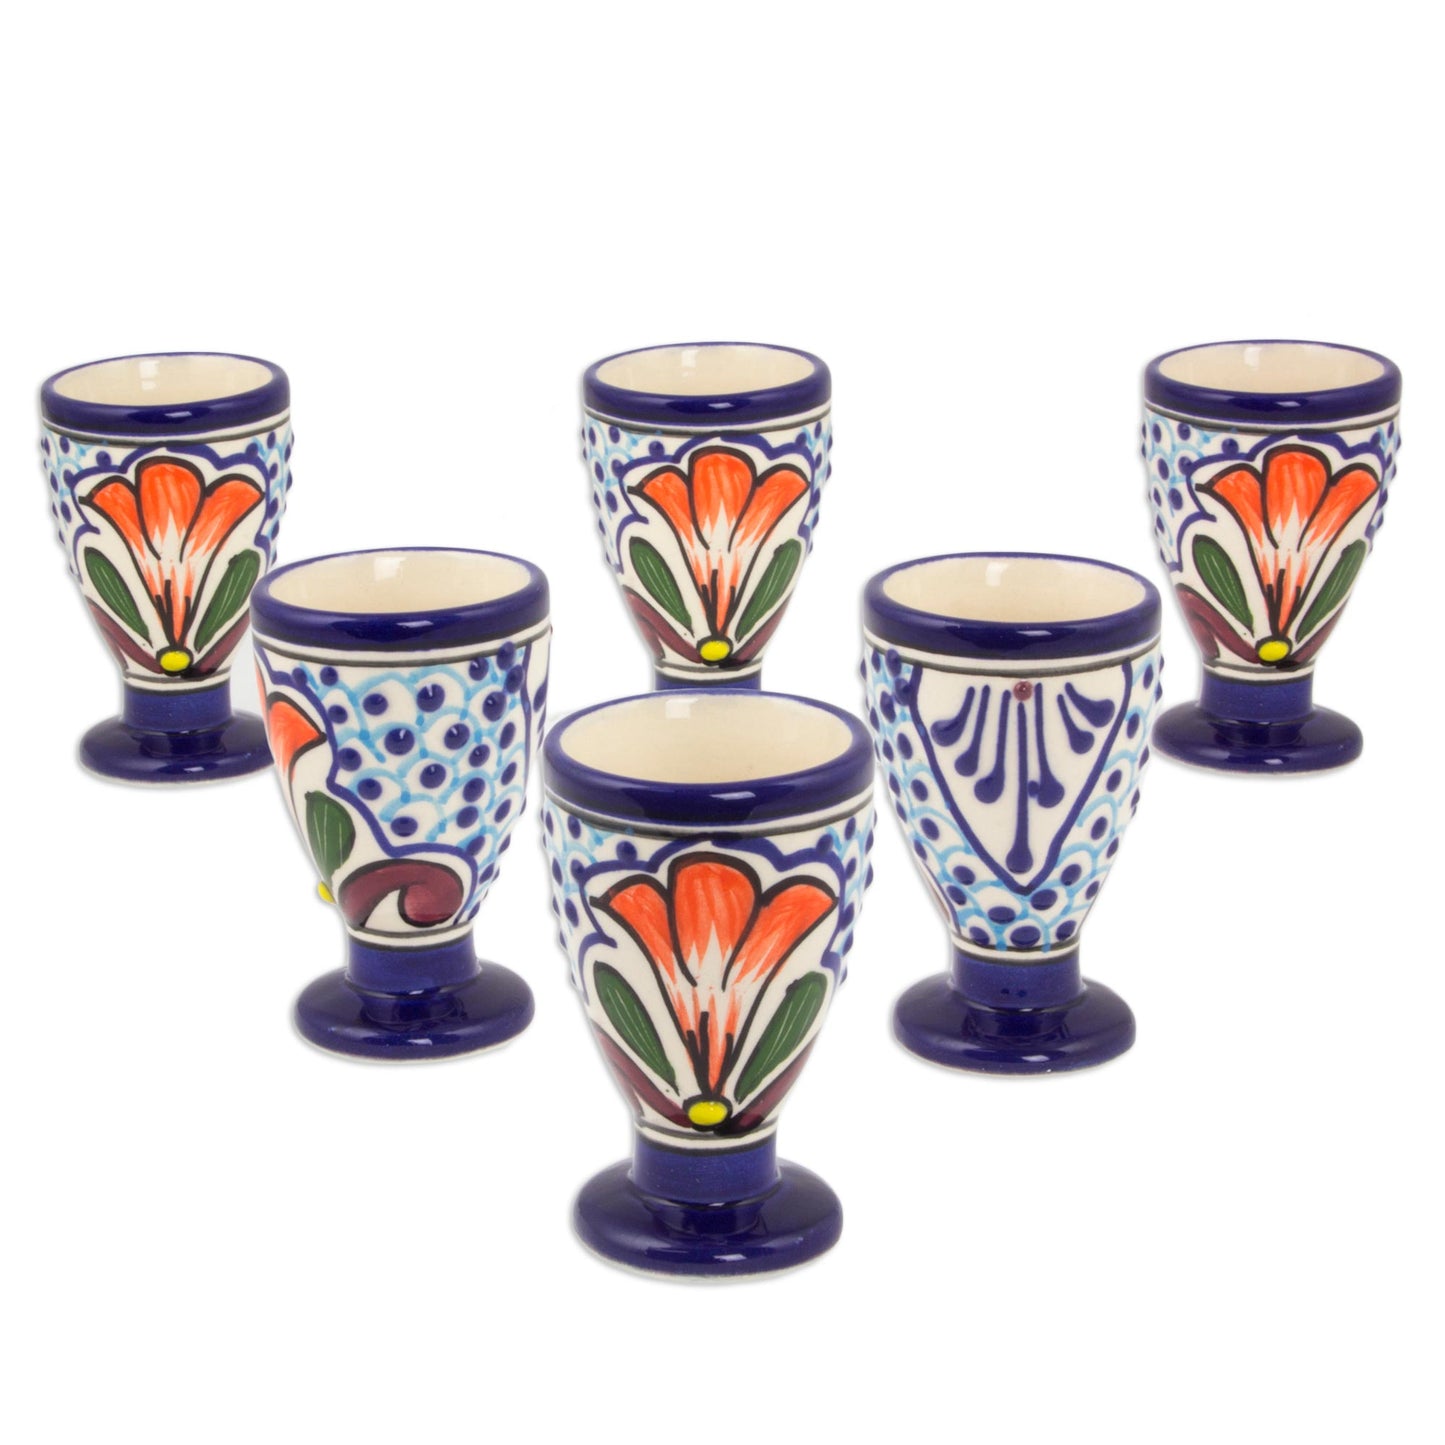 Radiant Flowers Painted Ceramic Cordial Glass Set